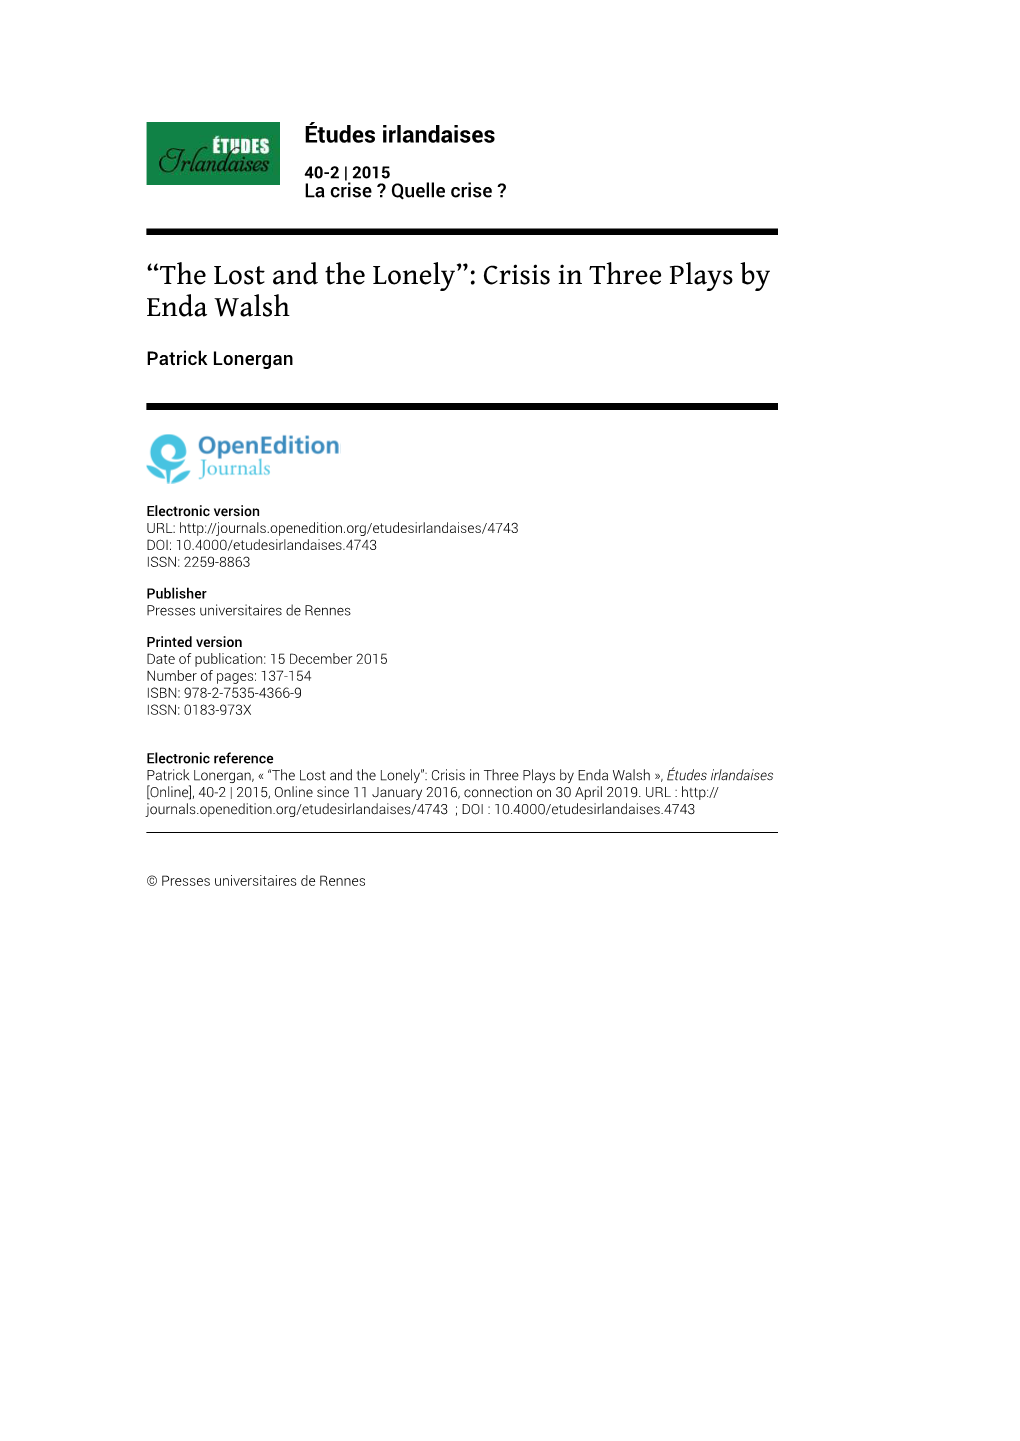 “The Lost and the Lonely”: Crisis in Three Plays by Enda Walsh